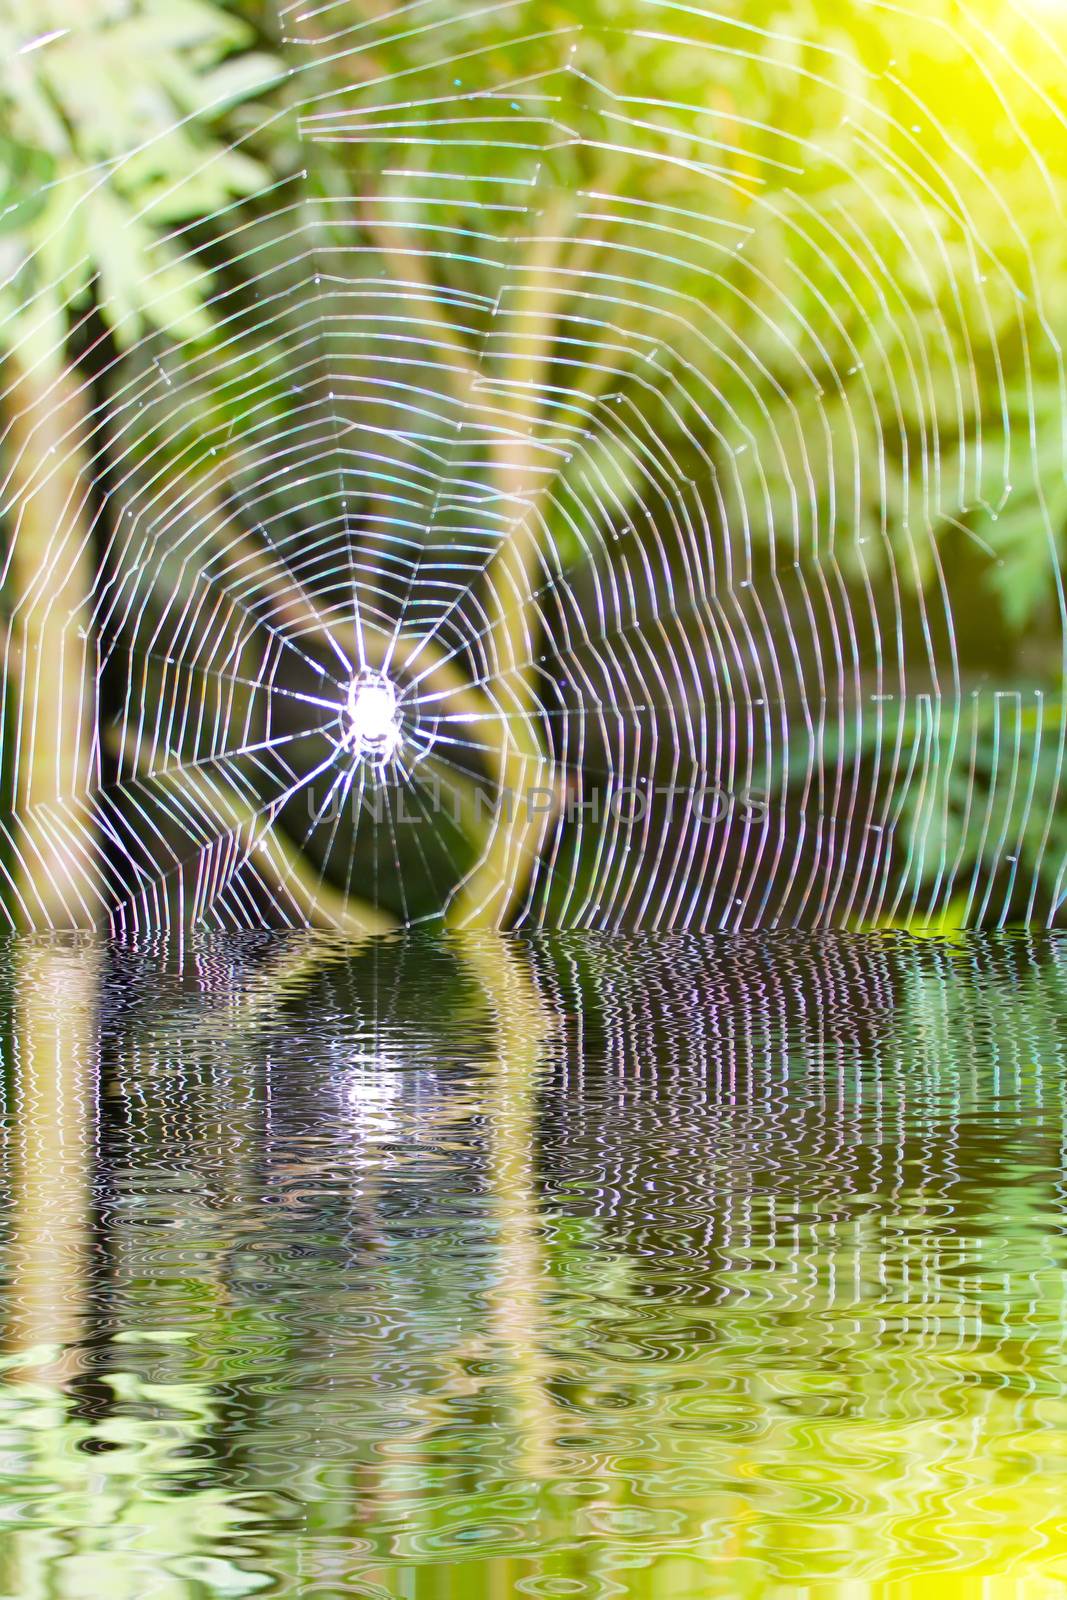 Spider  by dinhngochung